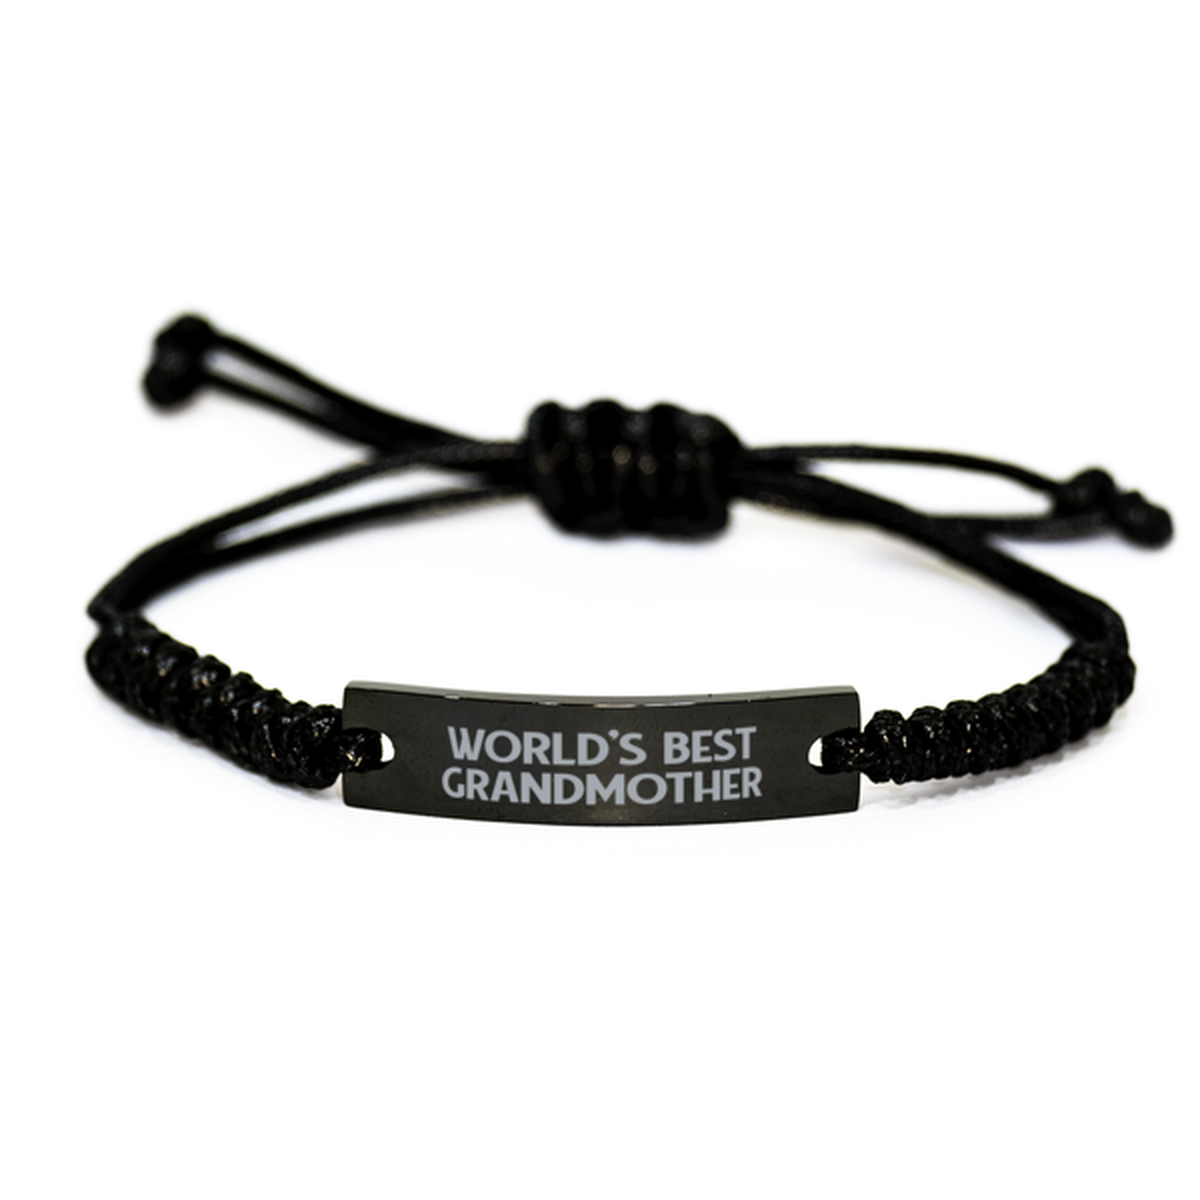 World's Best Grandmother Gifts, Funny Engraved Rope Bracelet For Grandmother, Birthday Family Gifts For Women